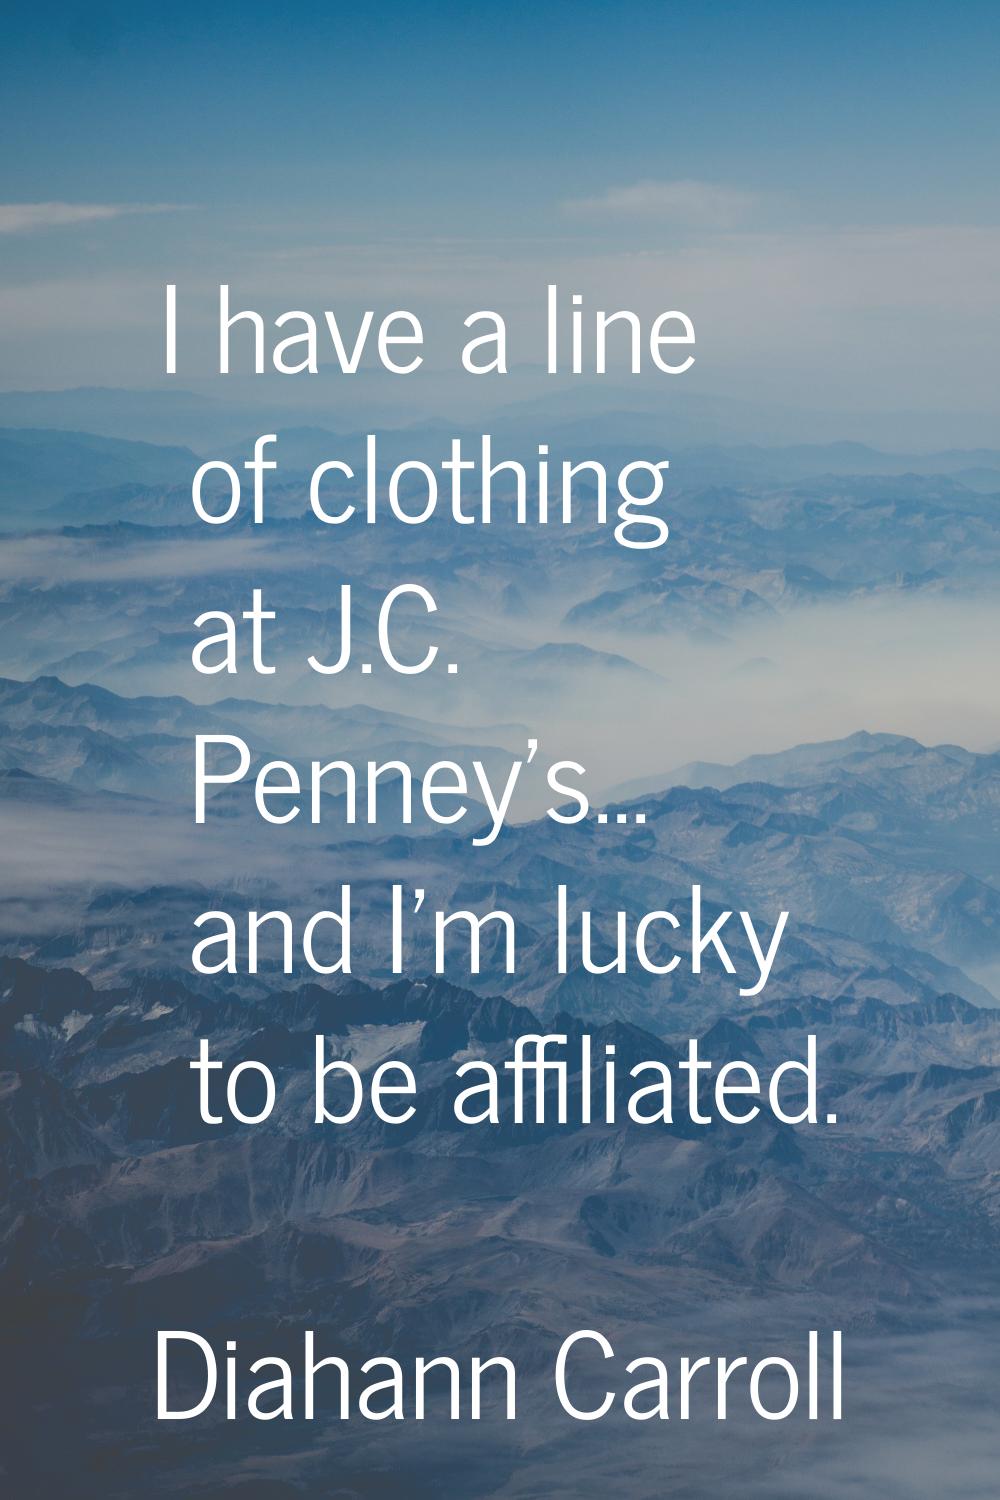 I have a line of clothing at J.C. Penney's... and I'm lucky to be affiliated.